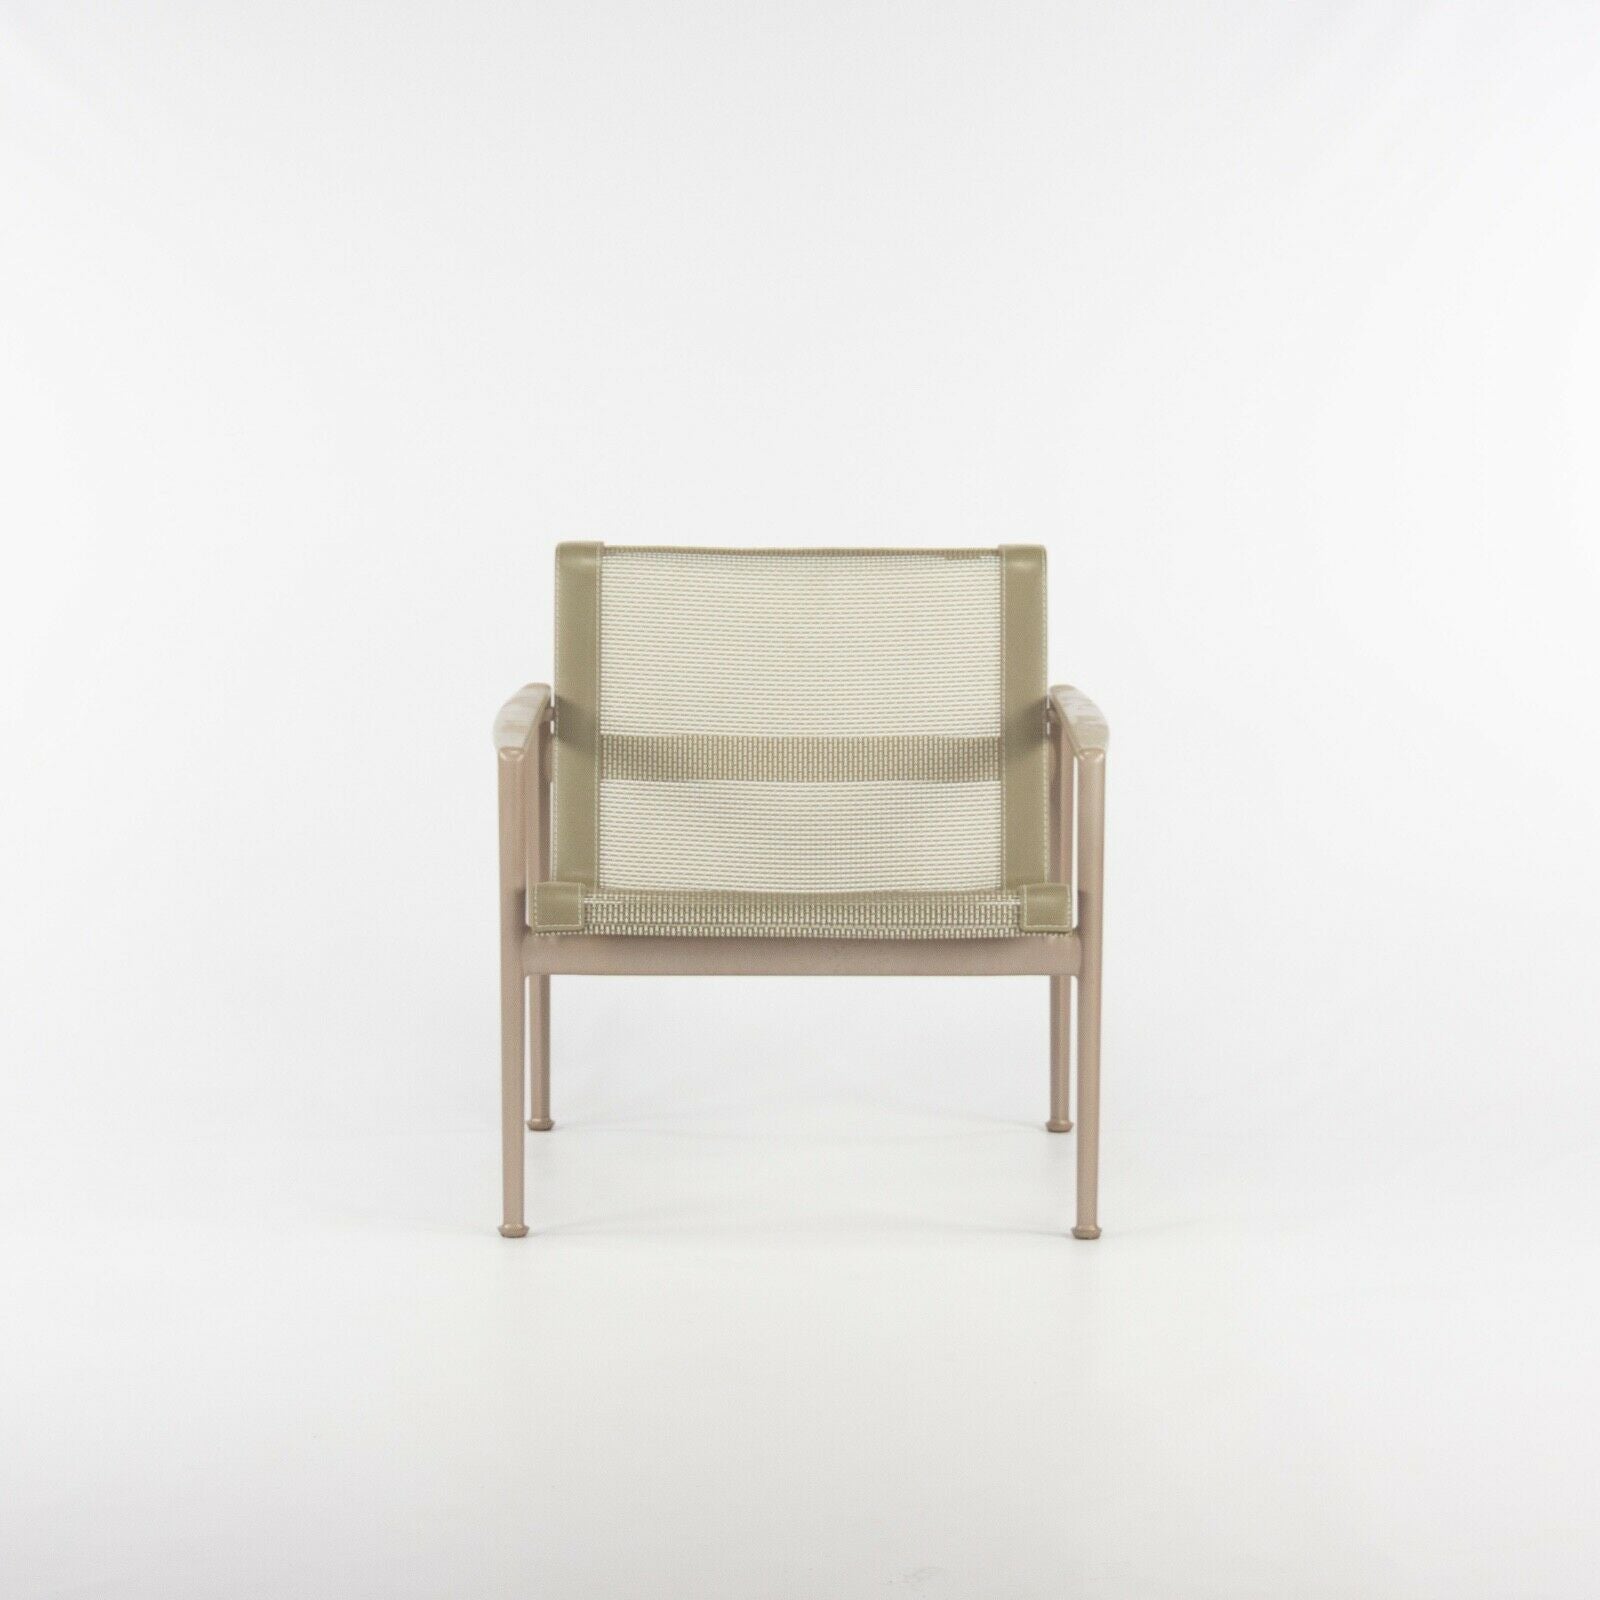 2020 Knoll Richard Schultz 1966 Series Outdoor Lounge Chair with Arms and Beige Frame